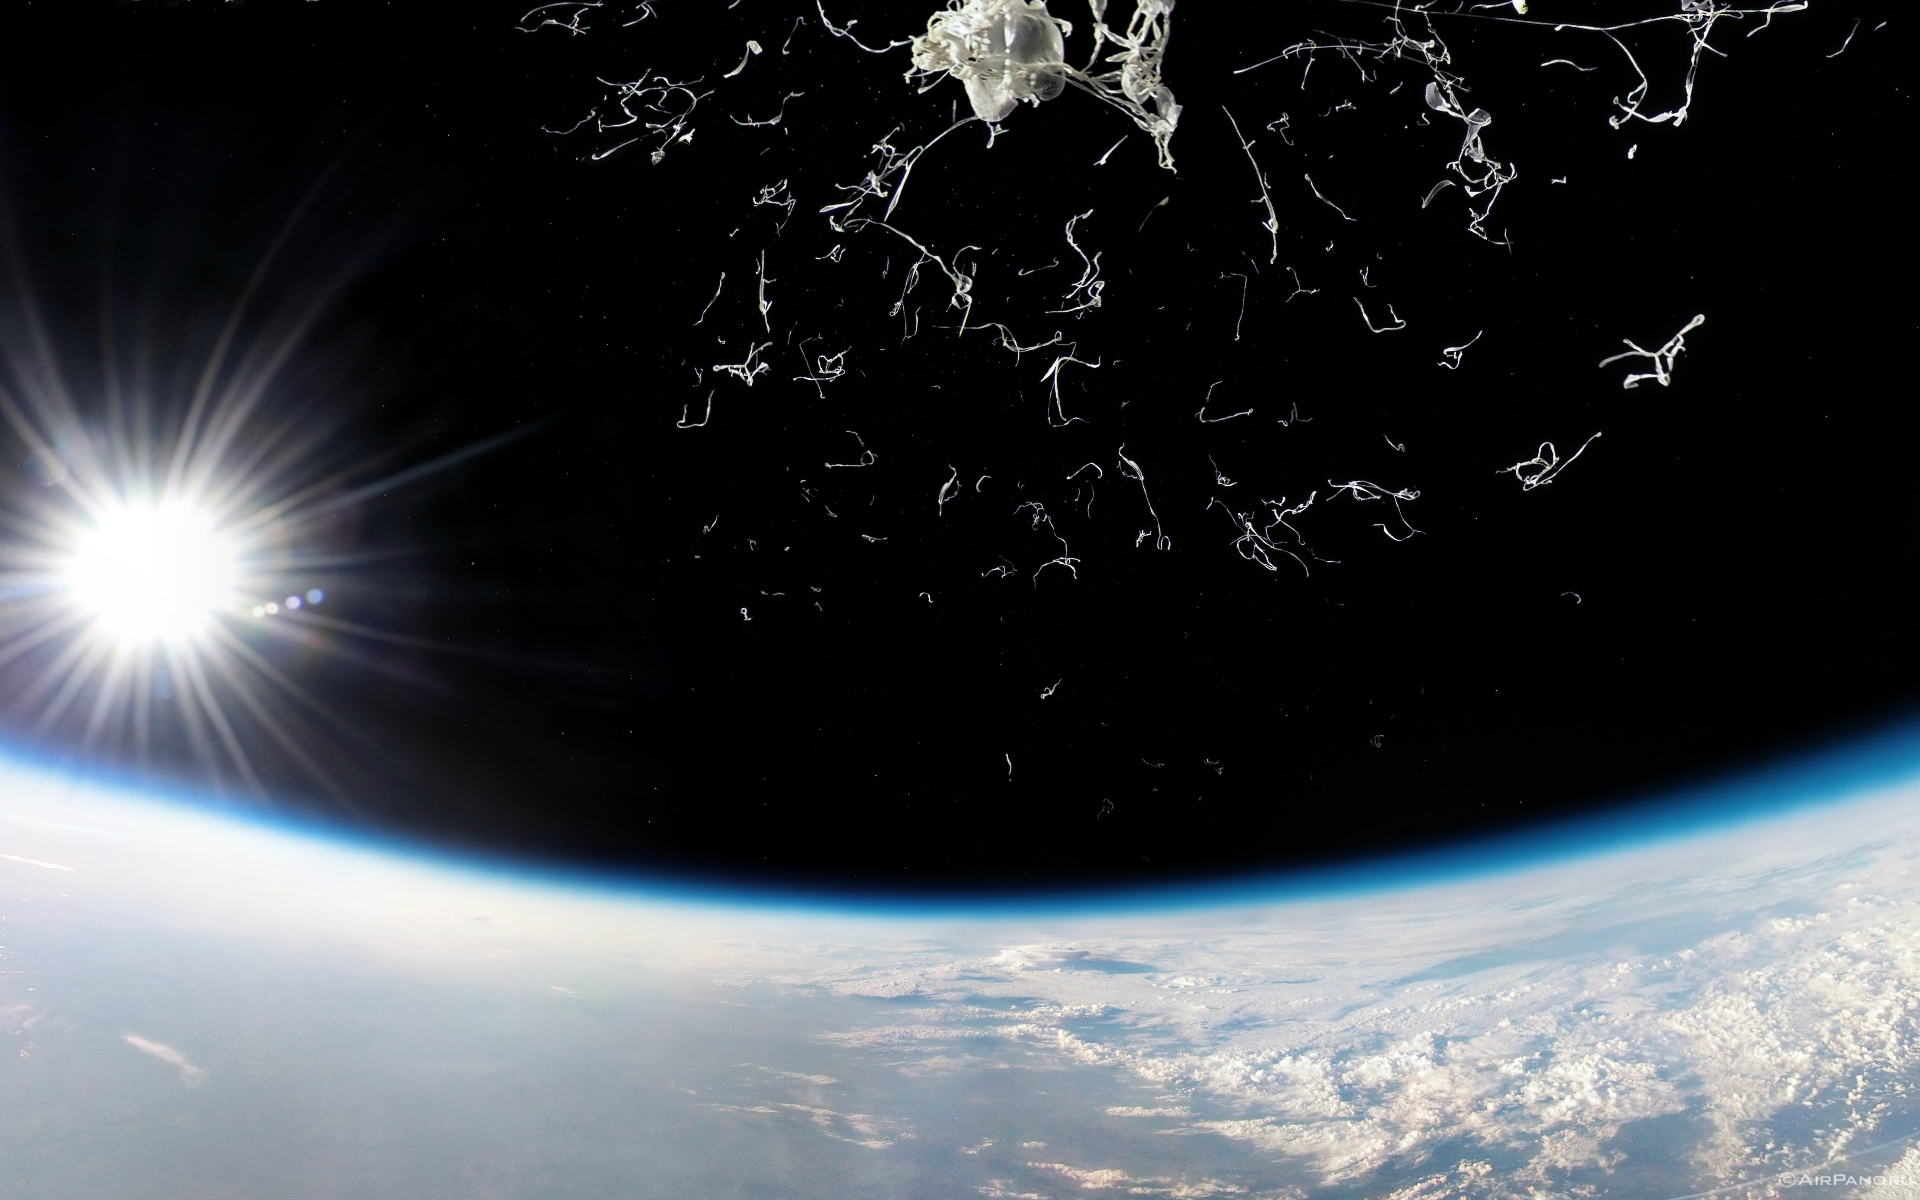 A picture of the moment a stratospheric balloon bursts